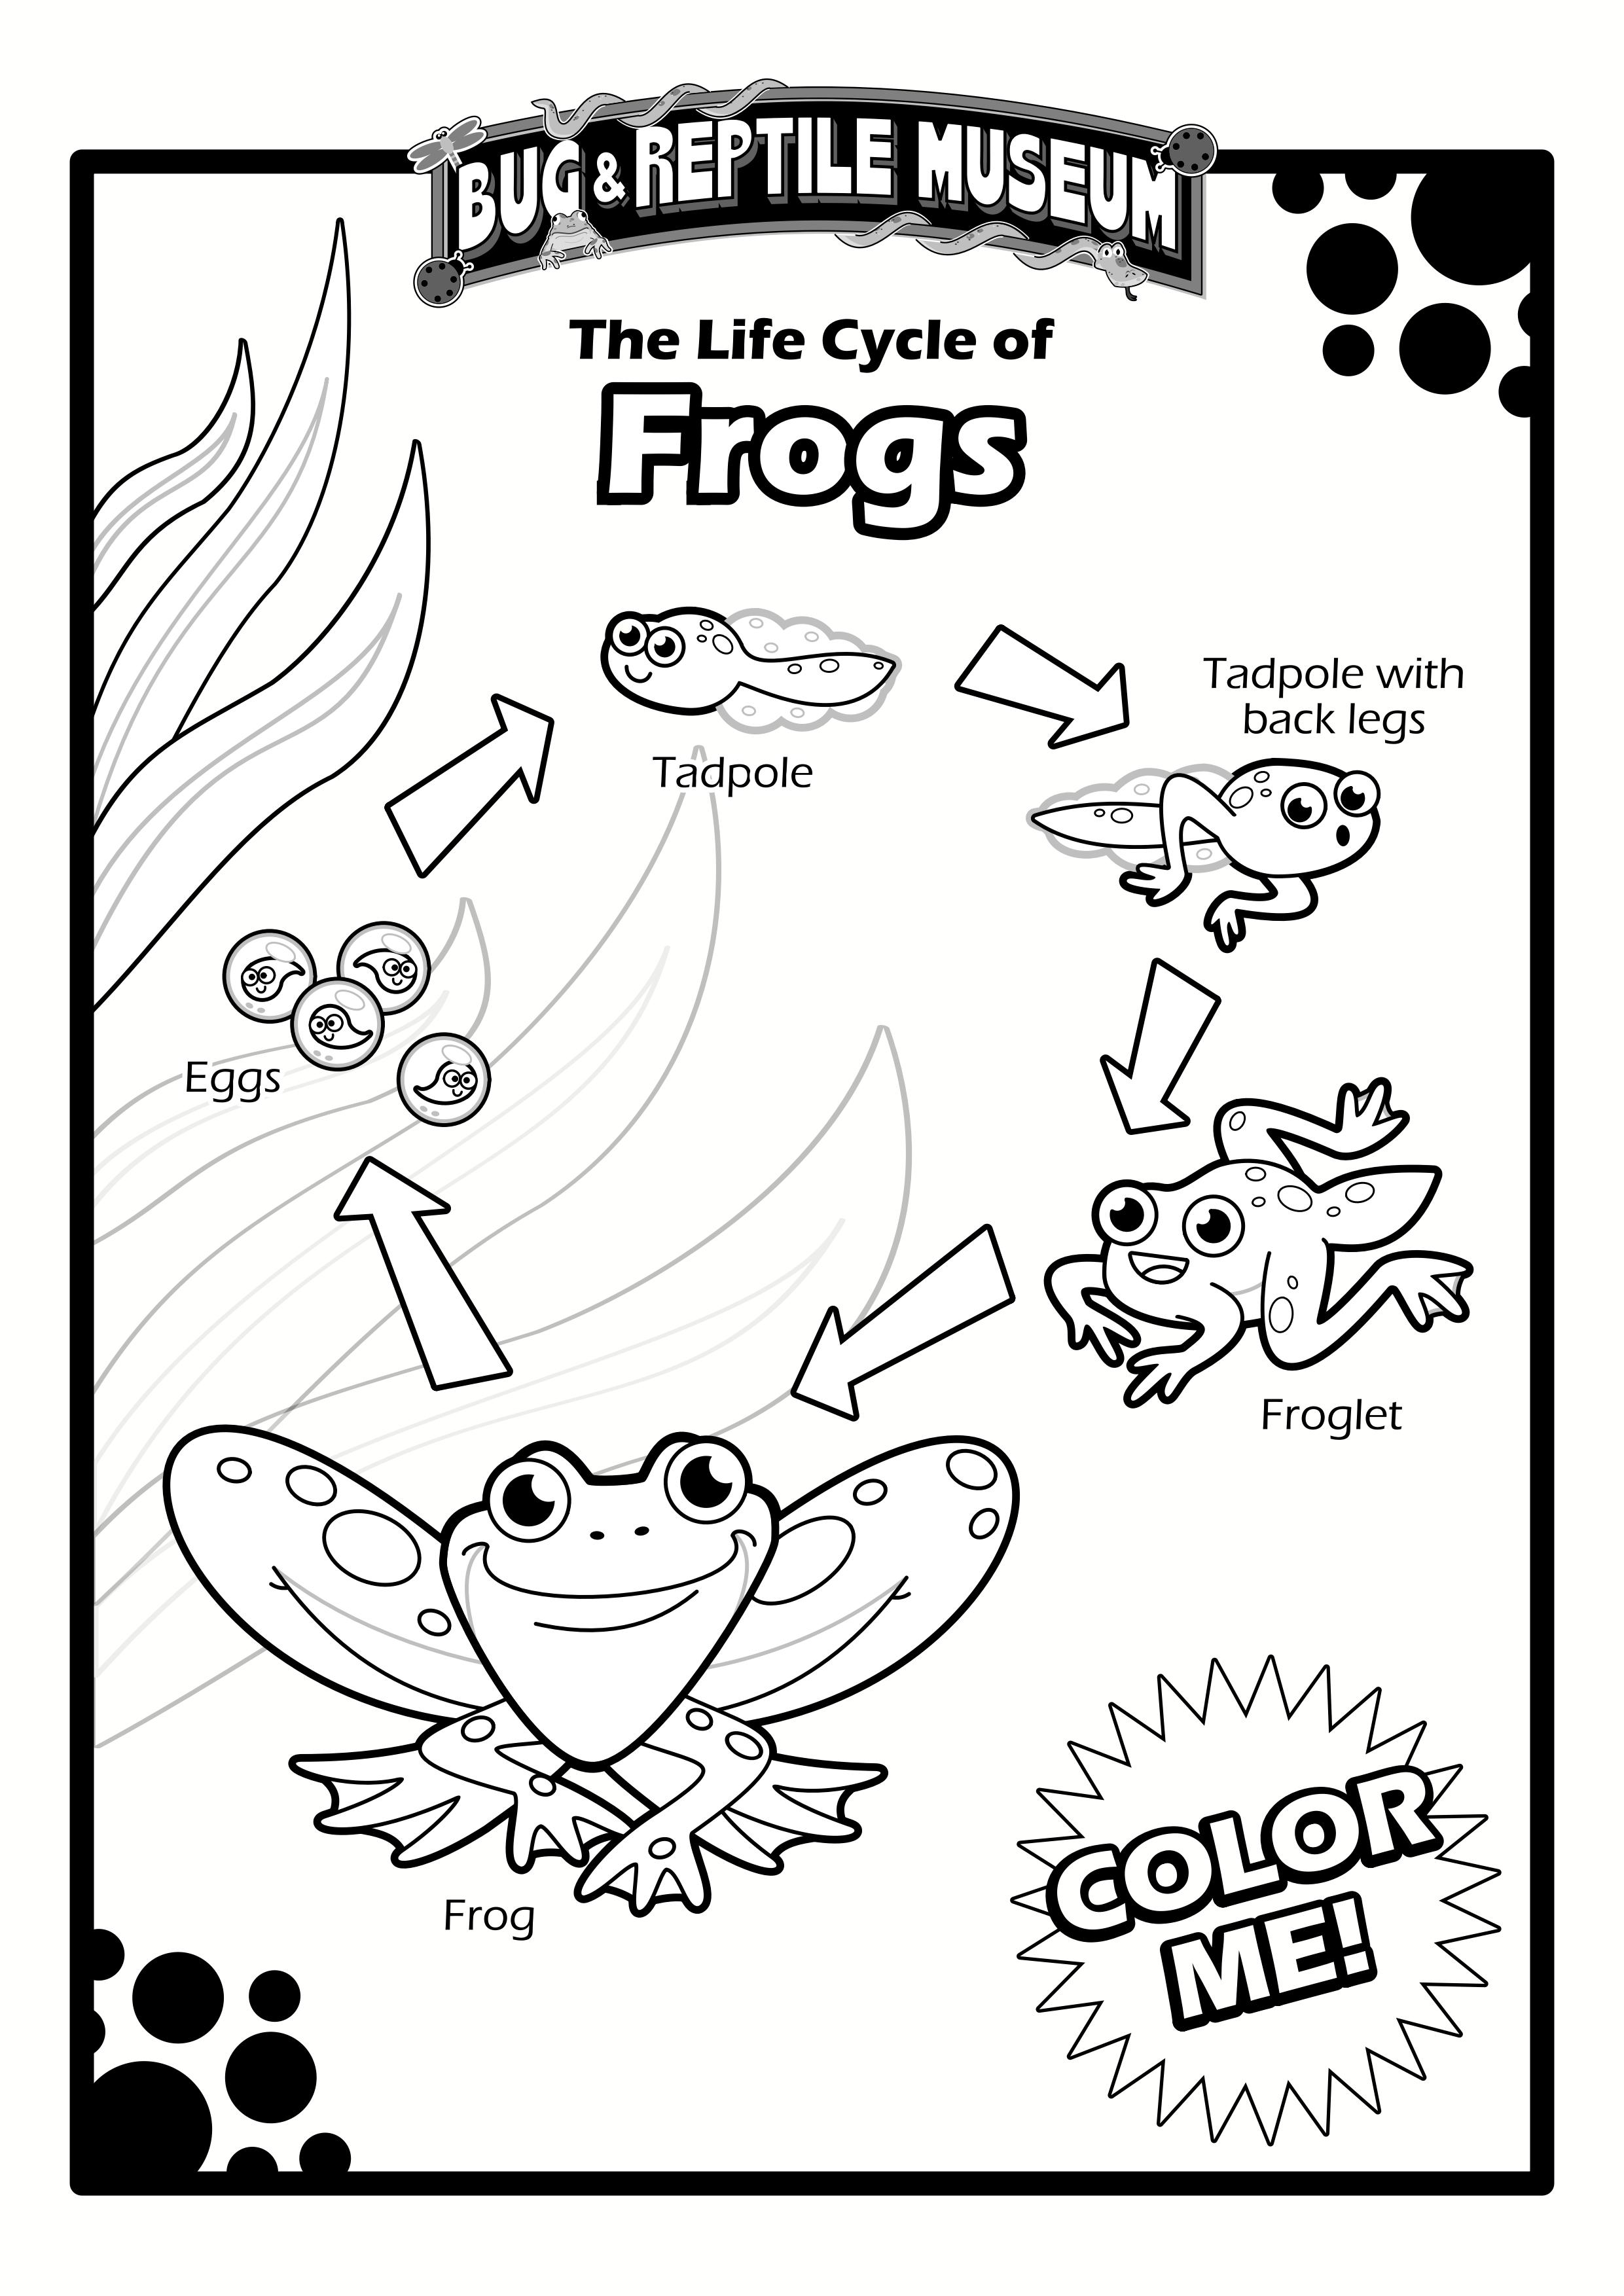 color museum frog cycle